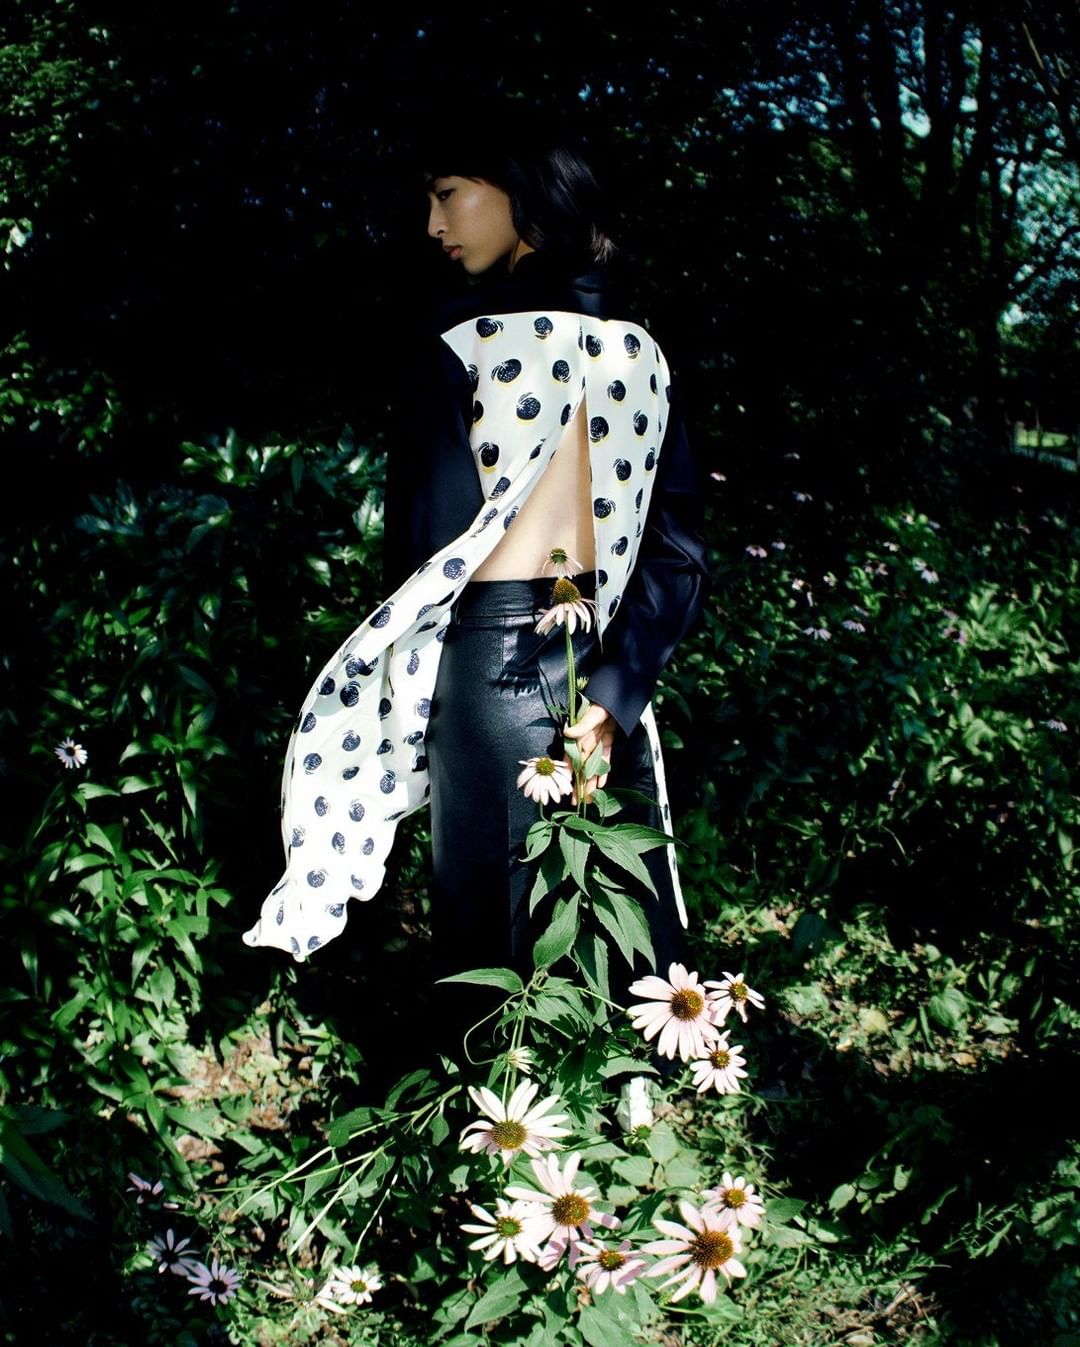 Stella McCartney - Autumn 2020 explores Stella women – unapologetic, unpredictable, unafraid to be themselves. Shot by @LeslieZhang1992 in Shanghai’s green spaces, art advocate and film curator #Jingy...